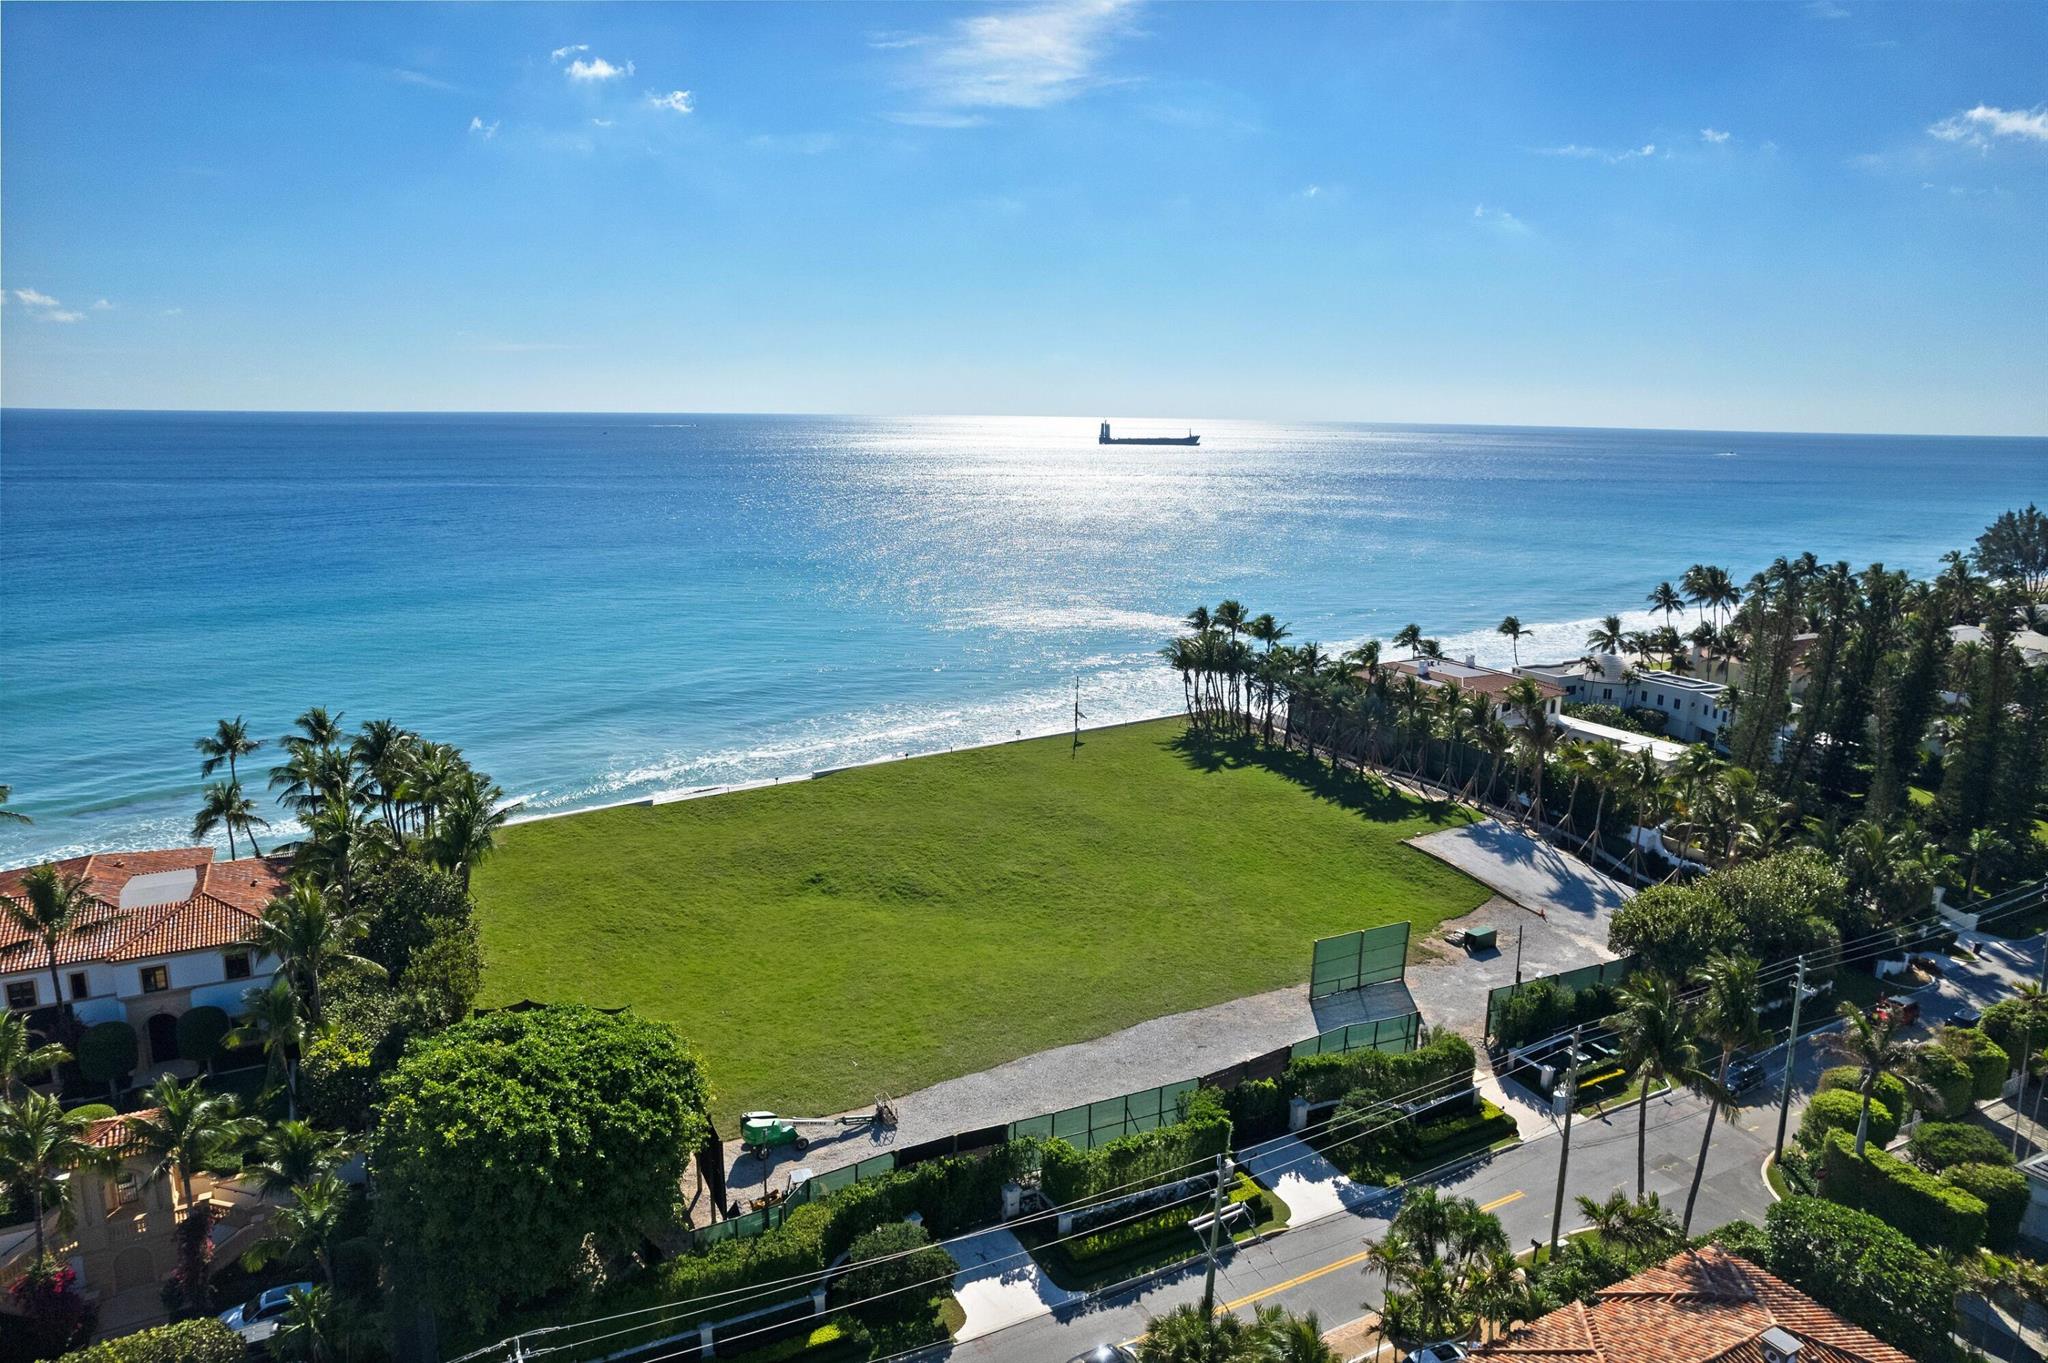 A Generational Opportunity to own the largest direct oceanfront estate parcel on the market in Palm Beach.  360+ feet on the Atlantic Ocean spanning 2.3+ acres. Property may be purchased in its entirety or as one of two parcels*. For the discerning owner to build an exceptional enclave that reflects their refined vision.For the knowledgeable financier to make a matchless investment in a rarified offering.For the family to develop a generational compound.  *Current Town of Palm Beach zoning code requires a minimum of 125' of frontage.